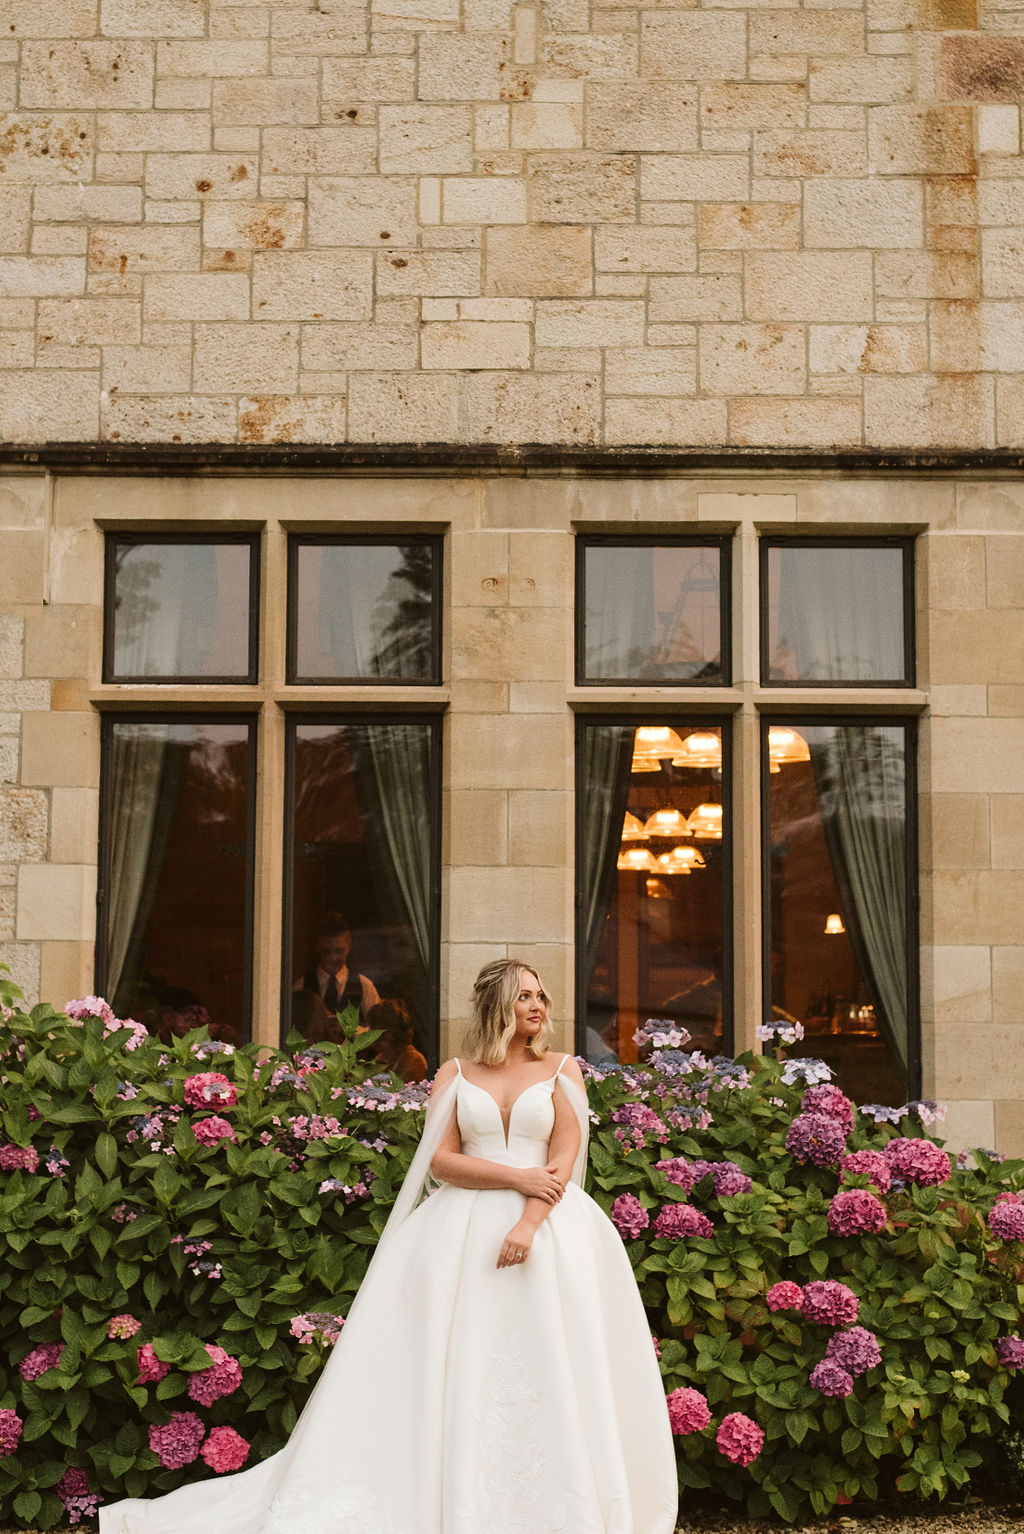 Bride wearing a mikado ballgown wedding dress with straps and tulle cape in front of hydrangeas at Lough Eske castle in Donegal, Ireland.